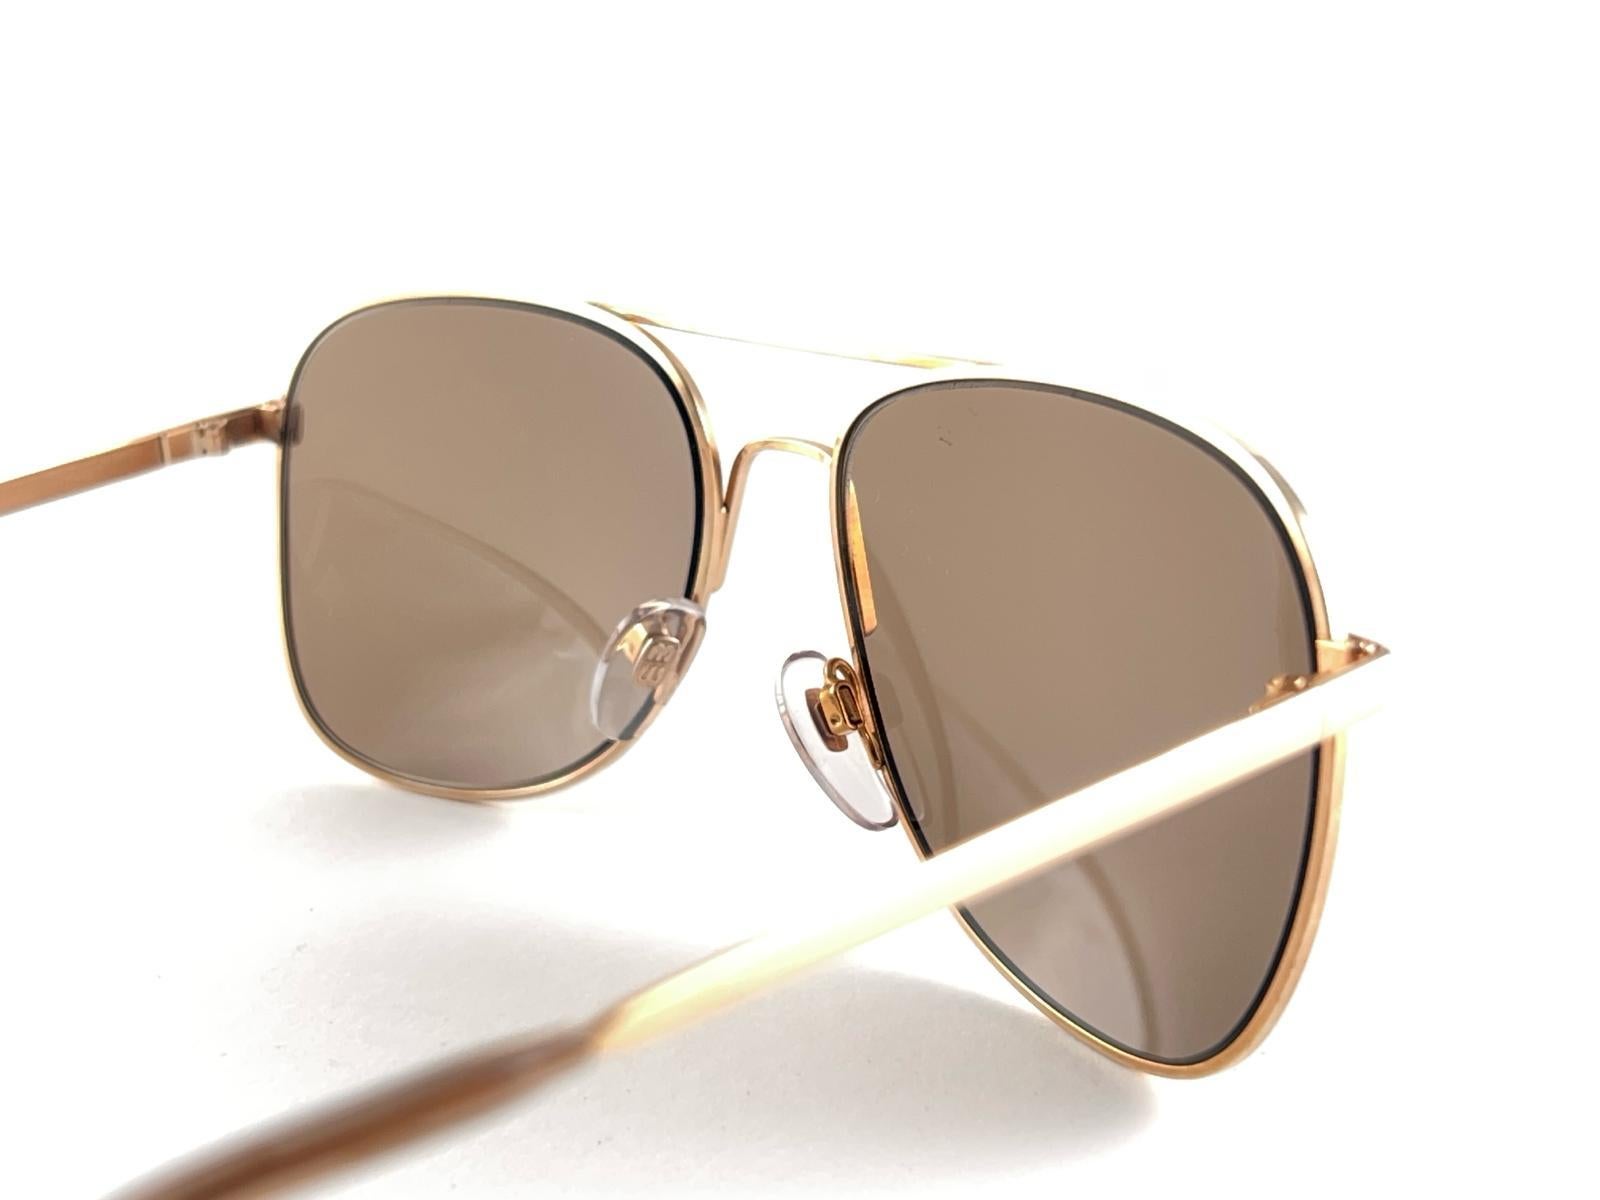 New Vintage Menrad 633 Oversized Gold Frame Sunglasses 1970'S Made In Germany For Sale 2